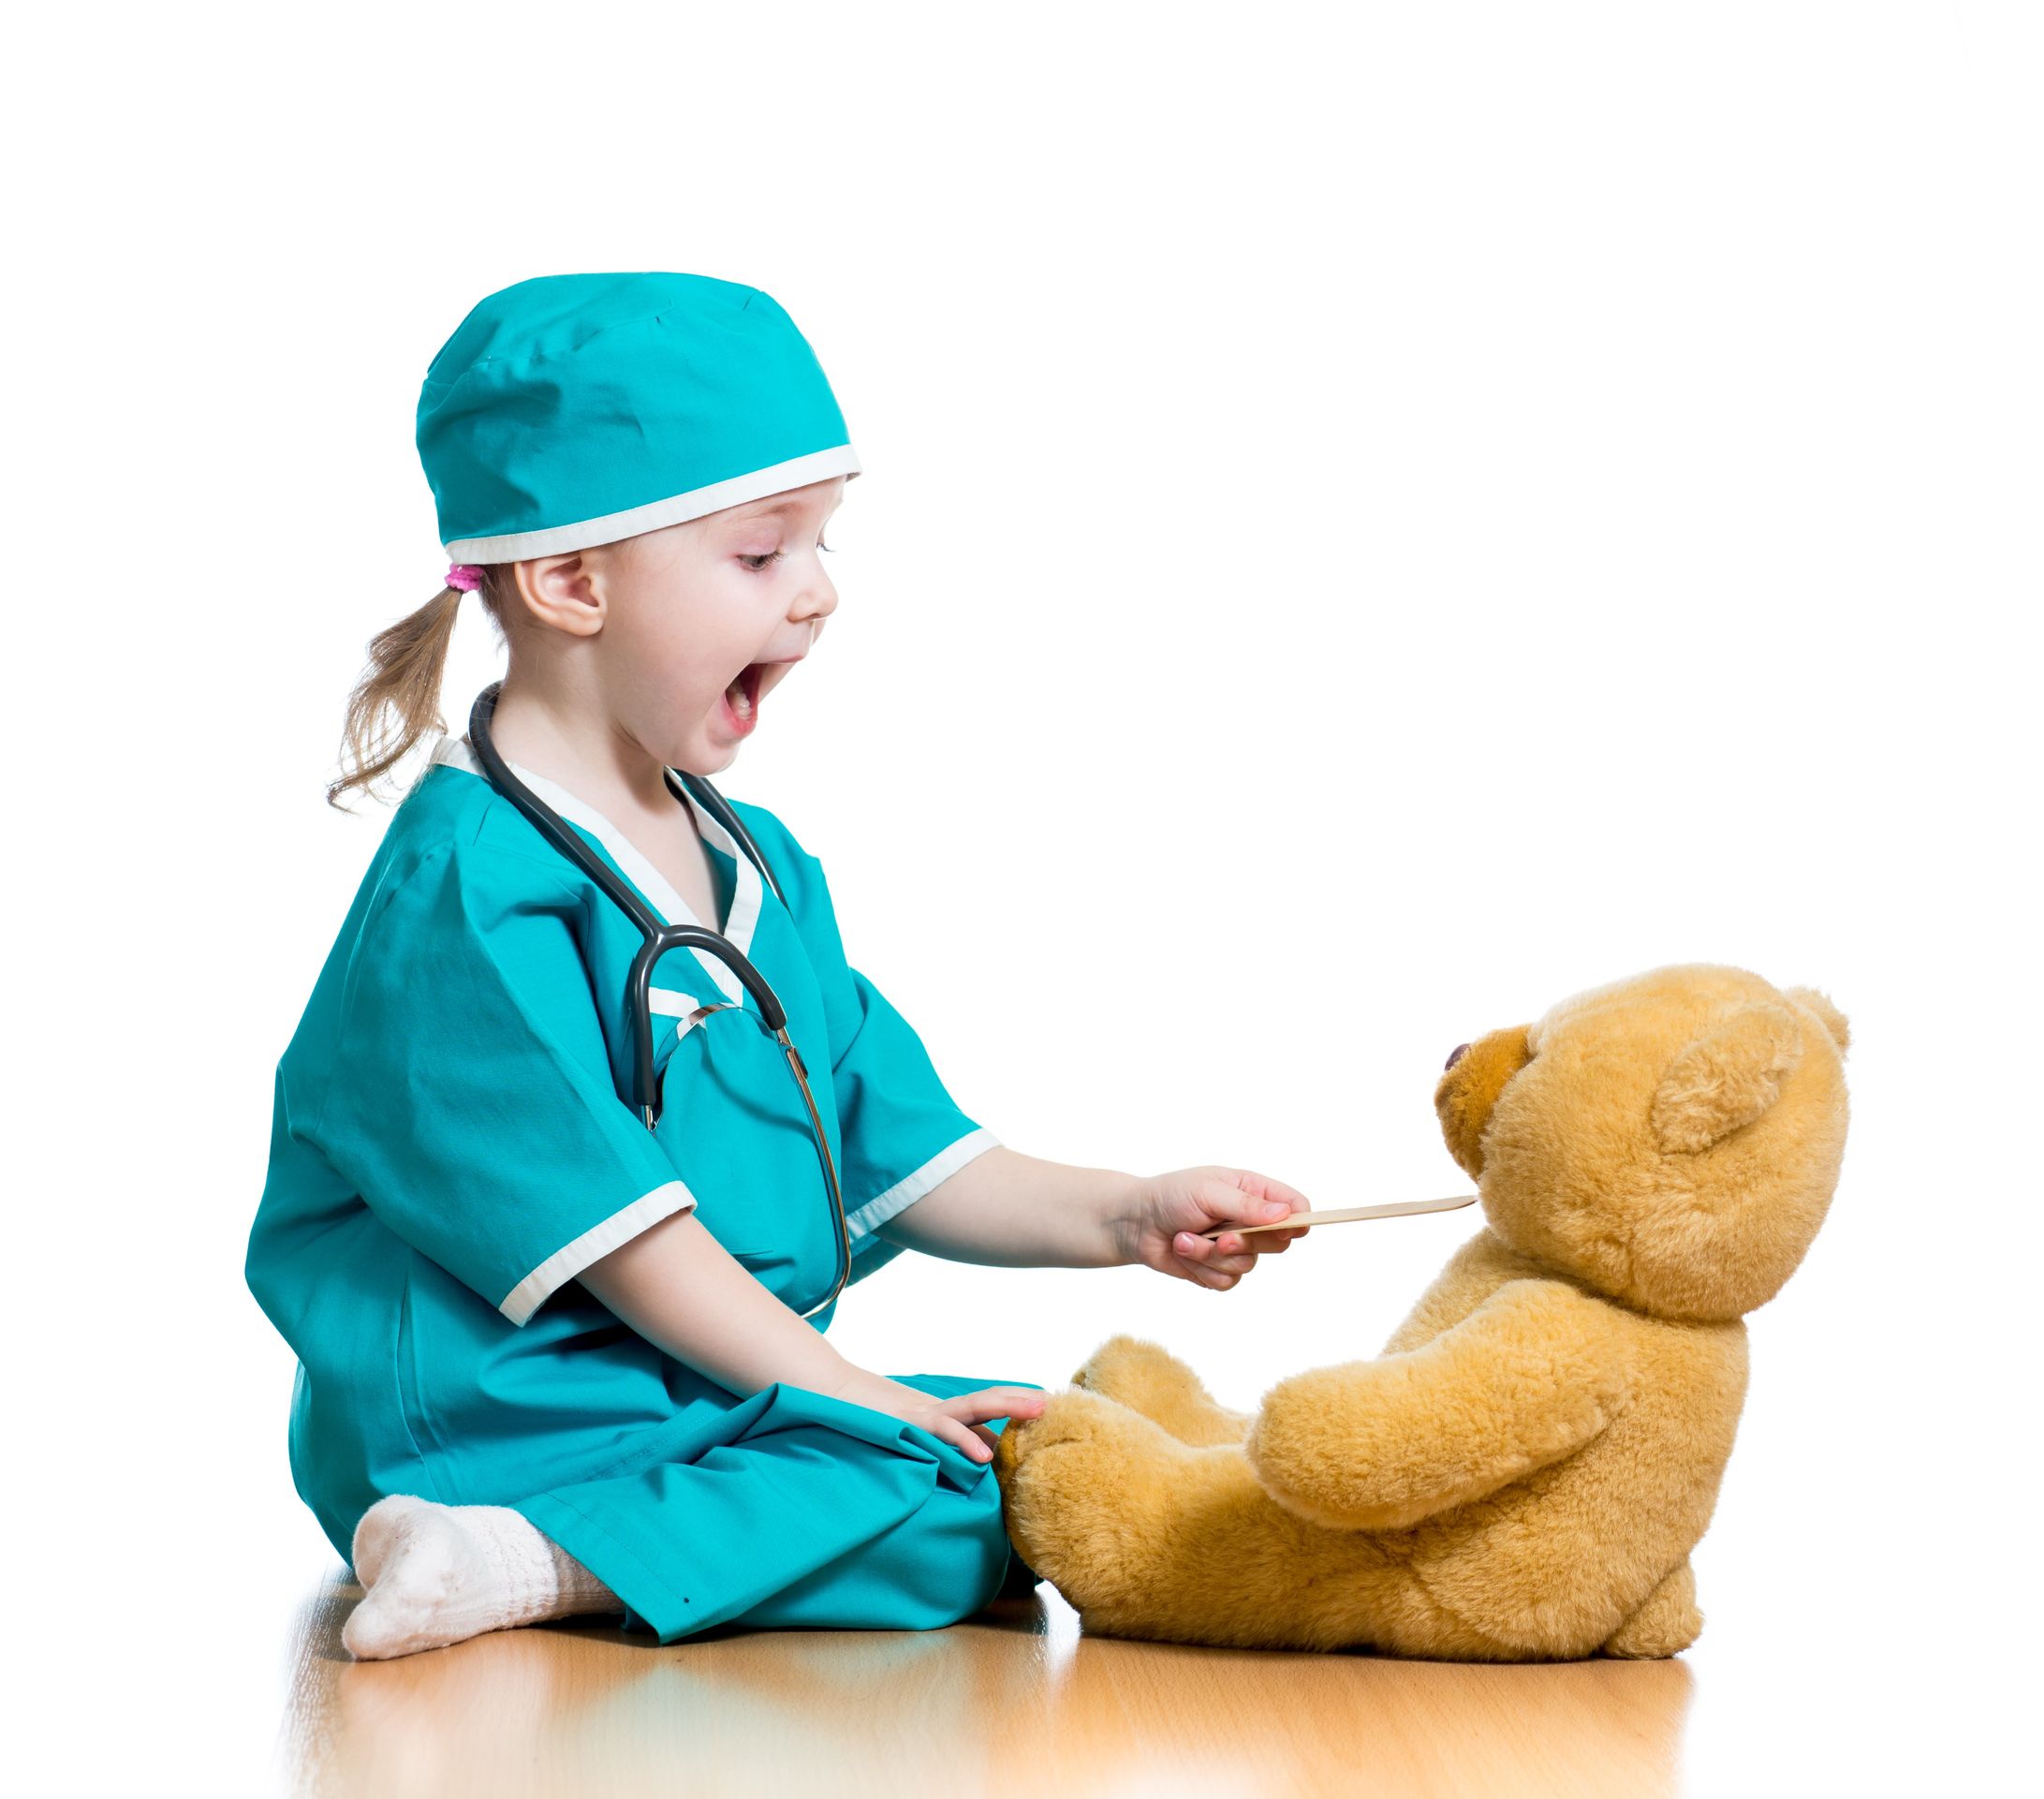 playing doctor, pretend play and cognitive development